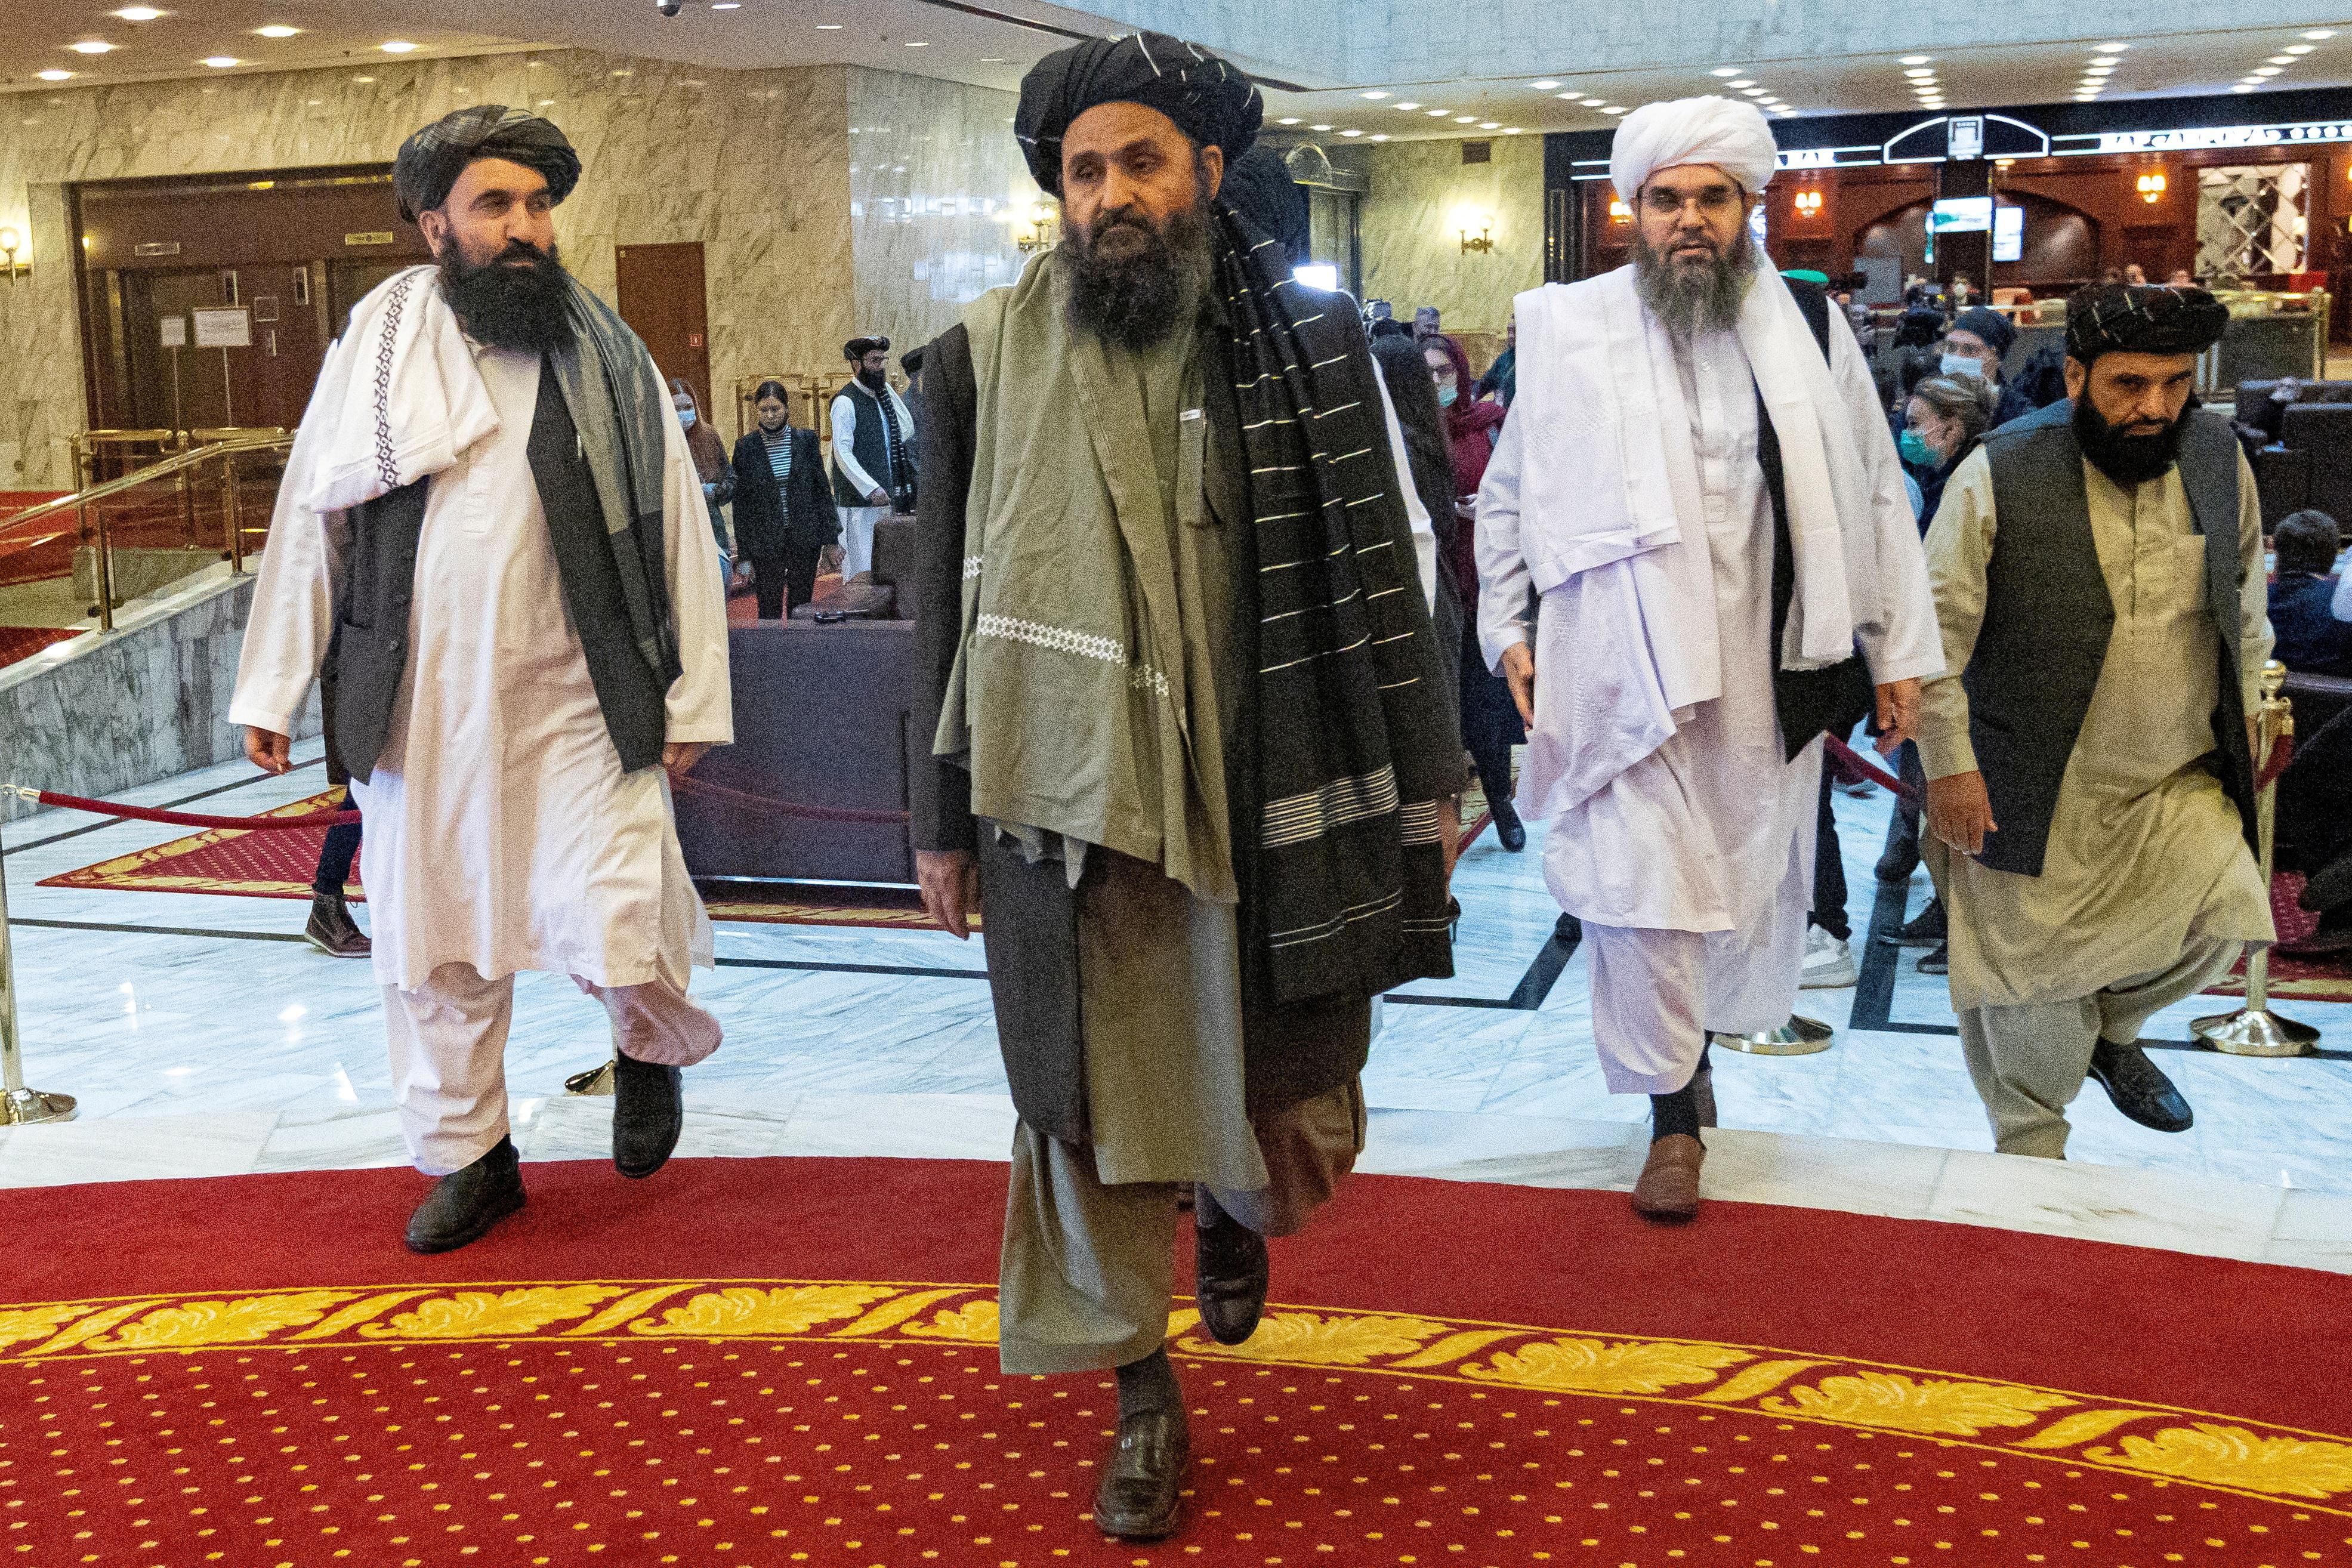 Would you recognize the Taliban?